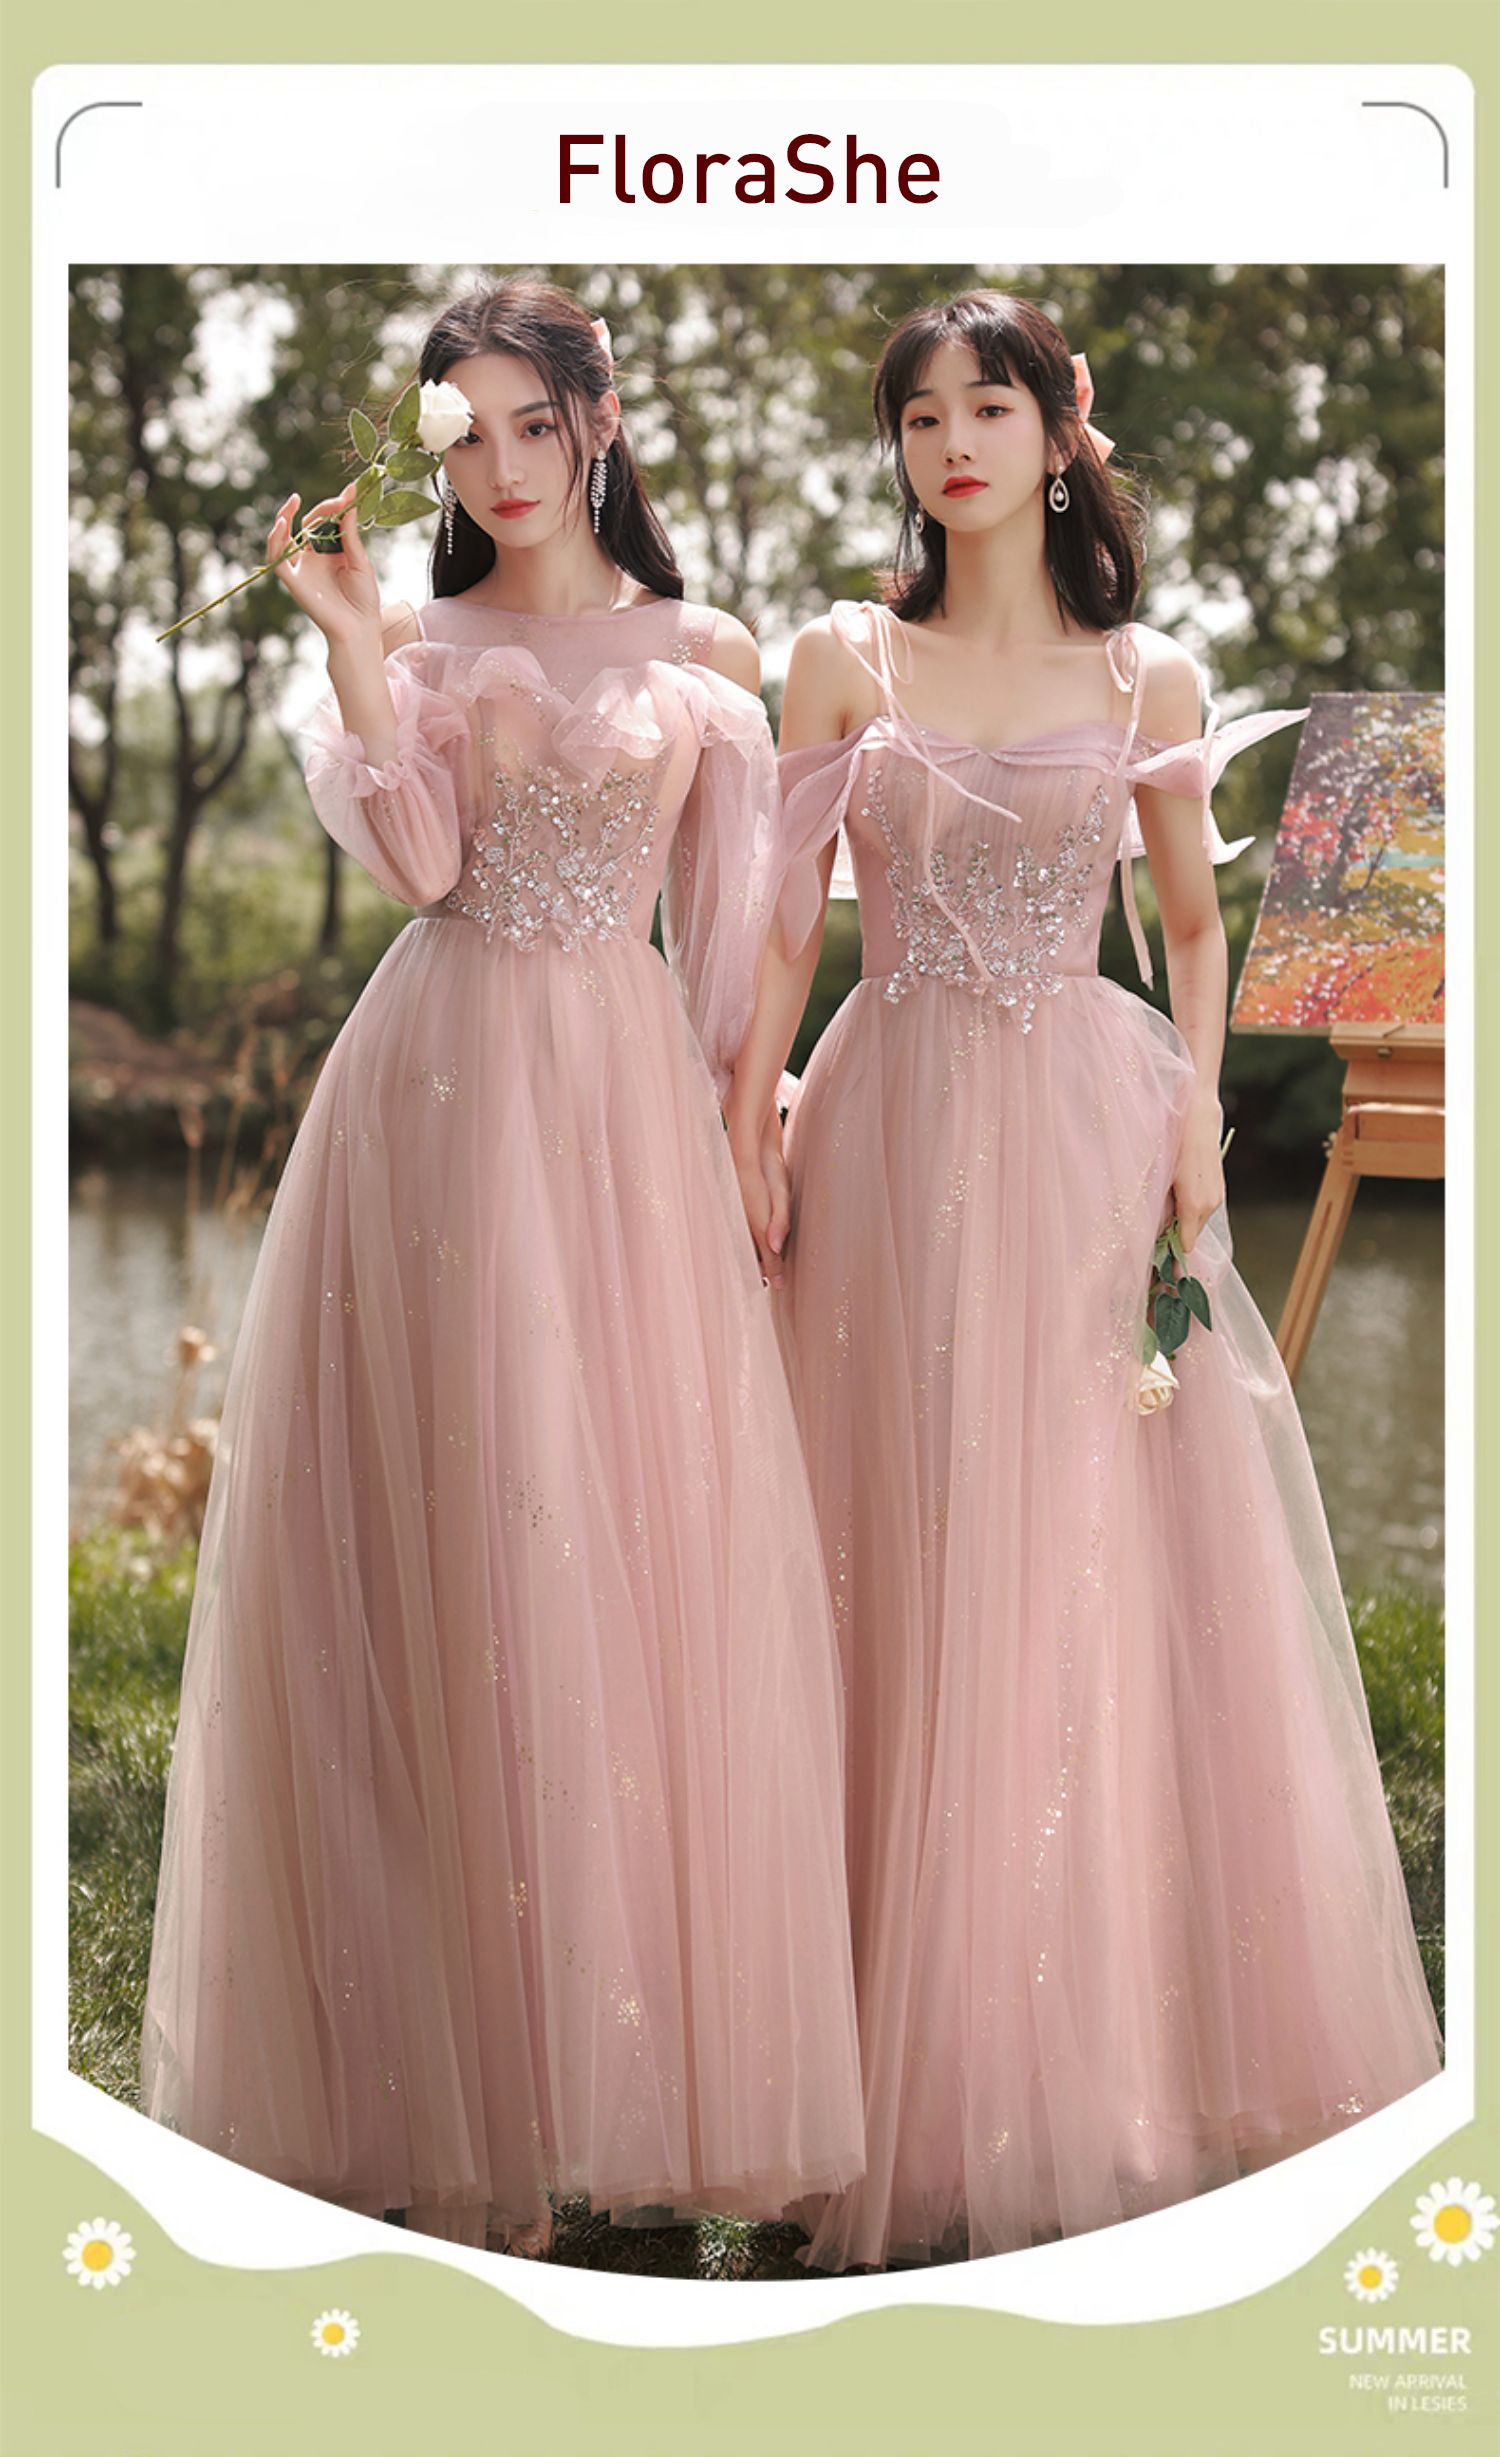 Romantic-Pink-Bridal-Party-Dress-Elegant-Occasions-Formal-Gown11.jpg